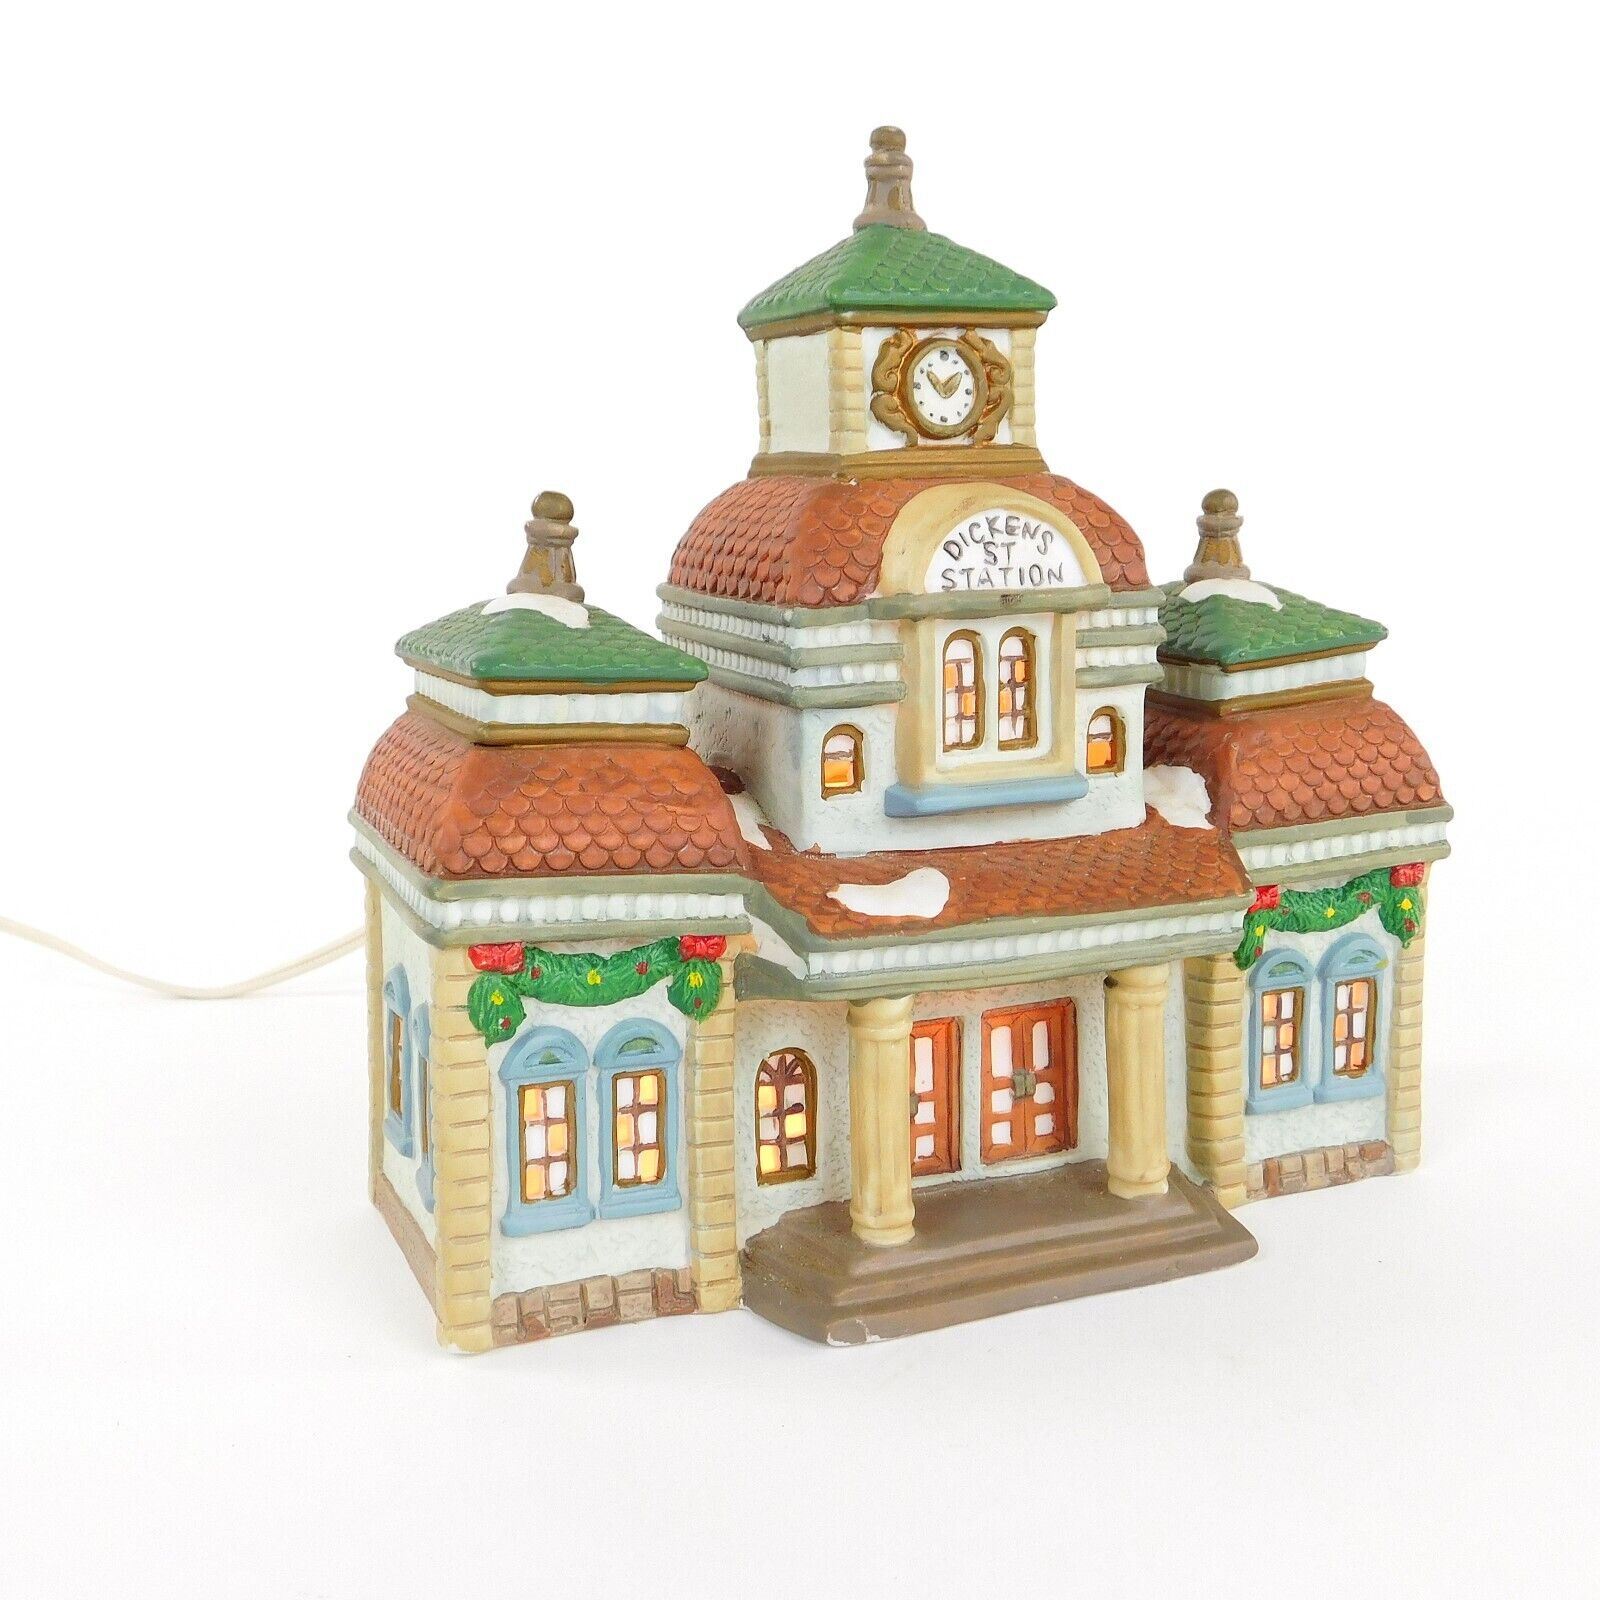 Dicken\'s Collectibles Porcelain Dickens St Station Dickens Keepsake O\'well 1993